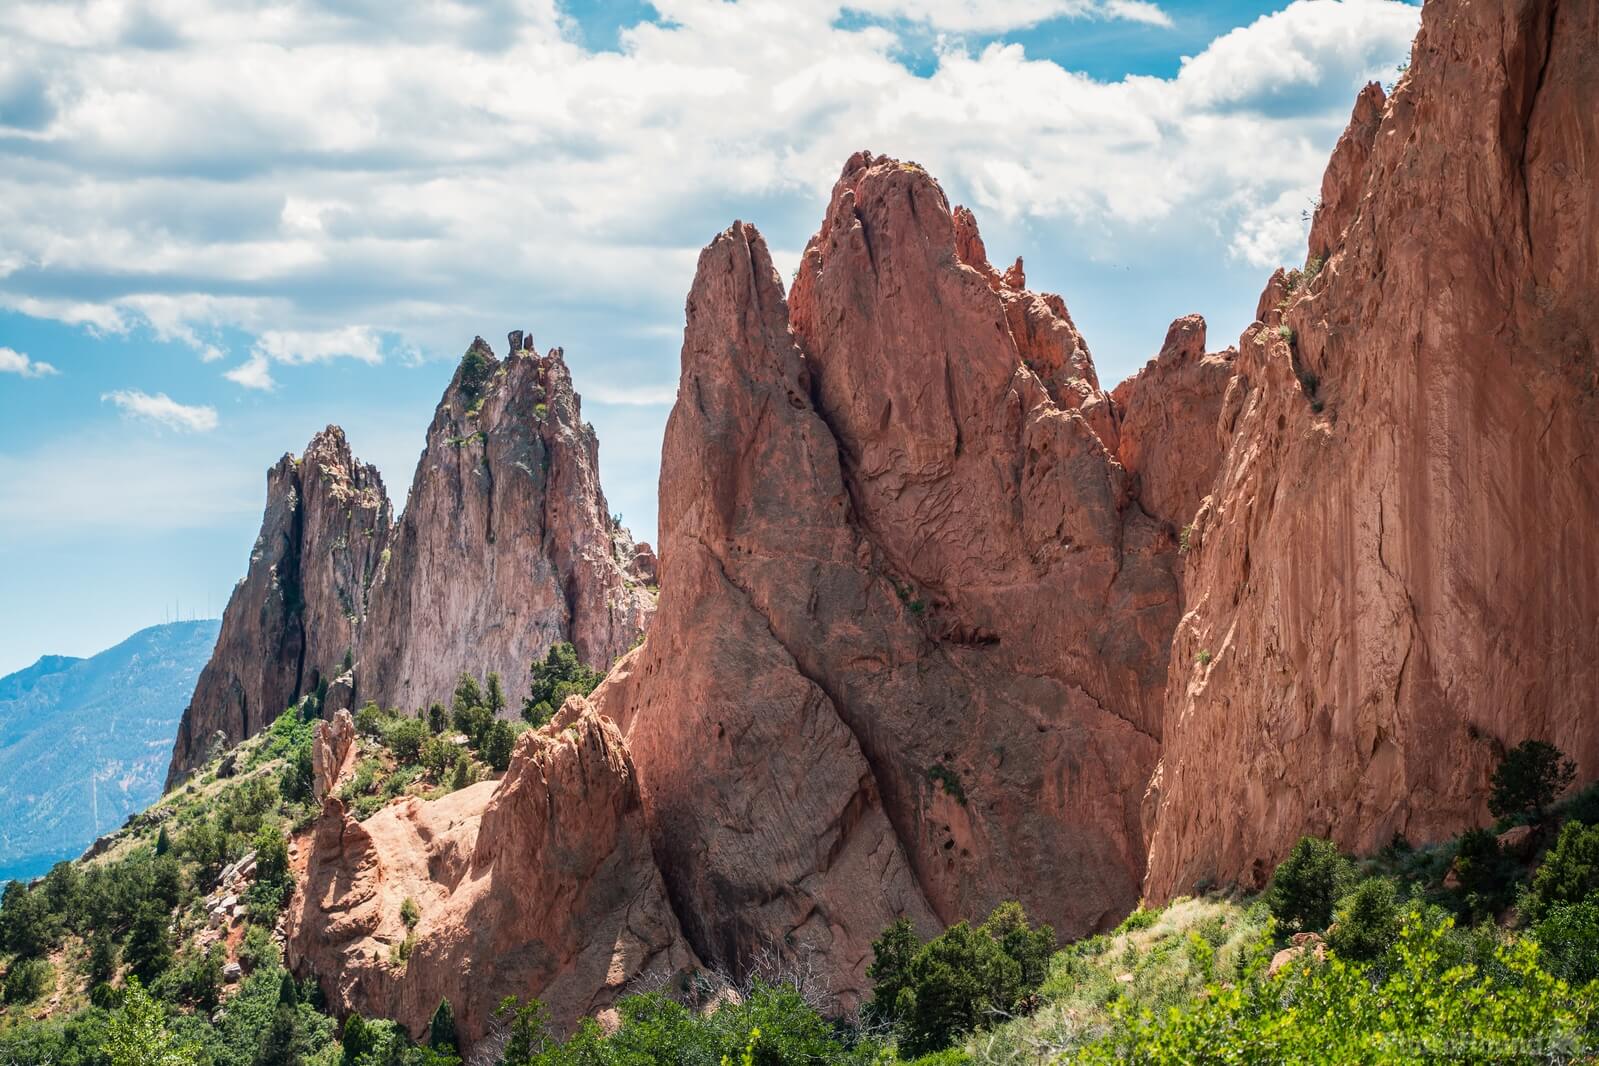 Image of Garden of the Gods by Jules Renahan